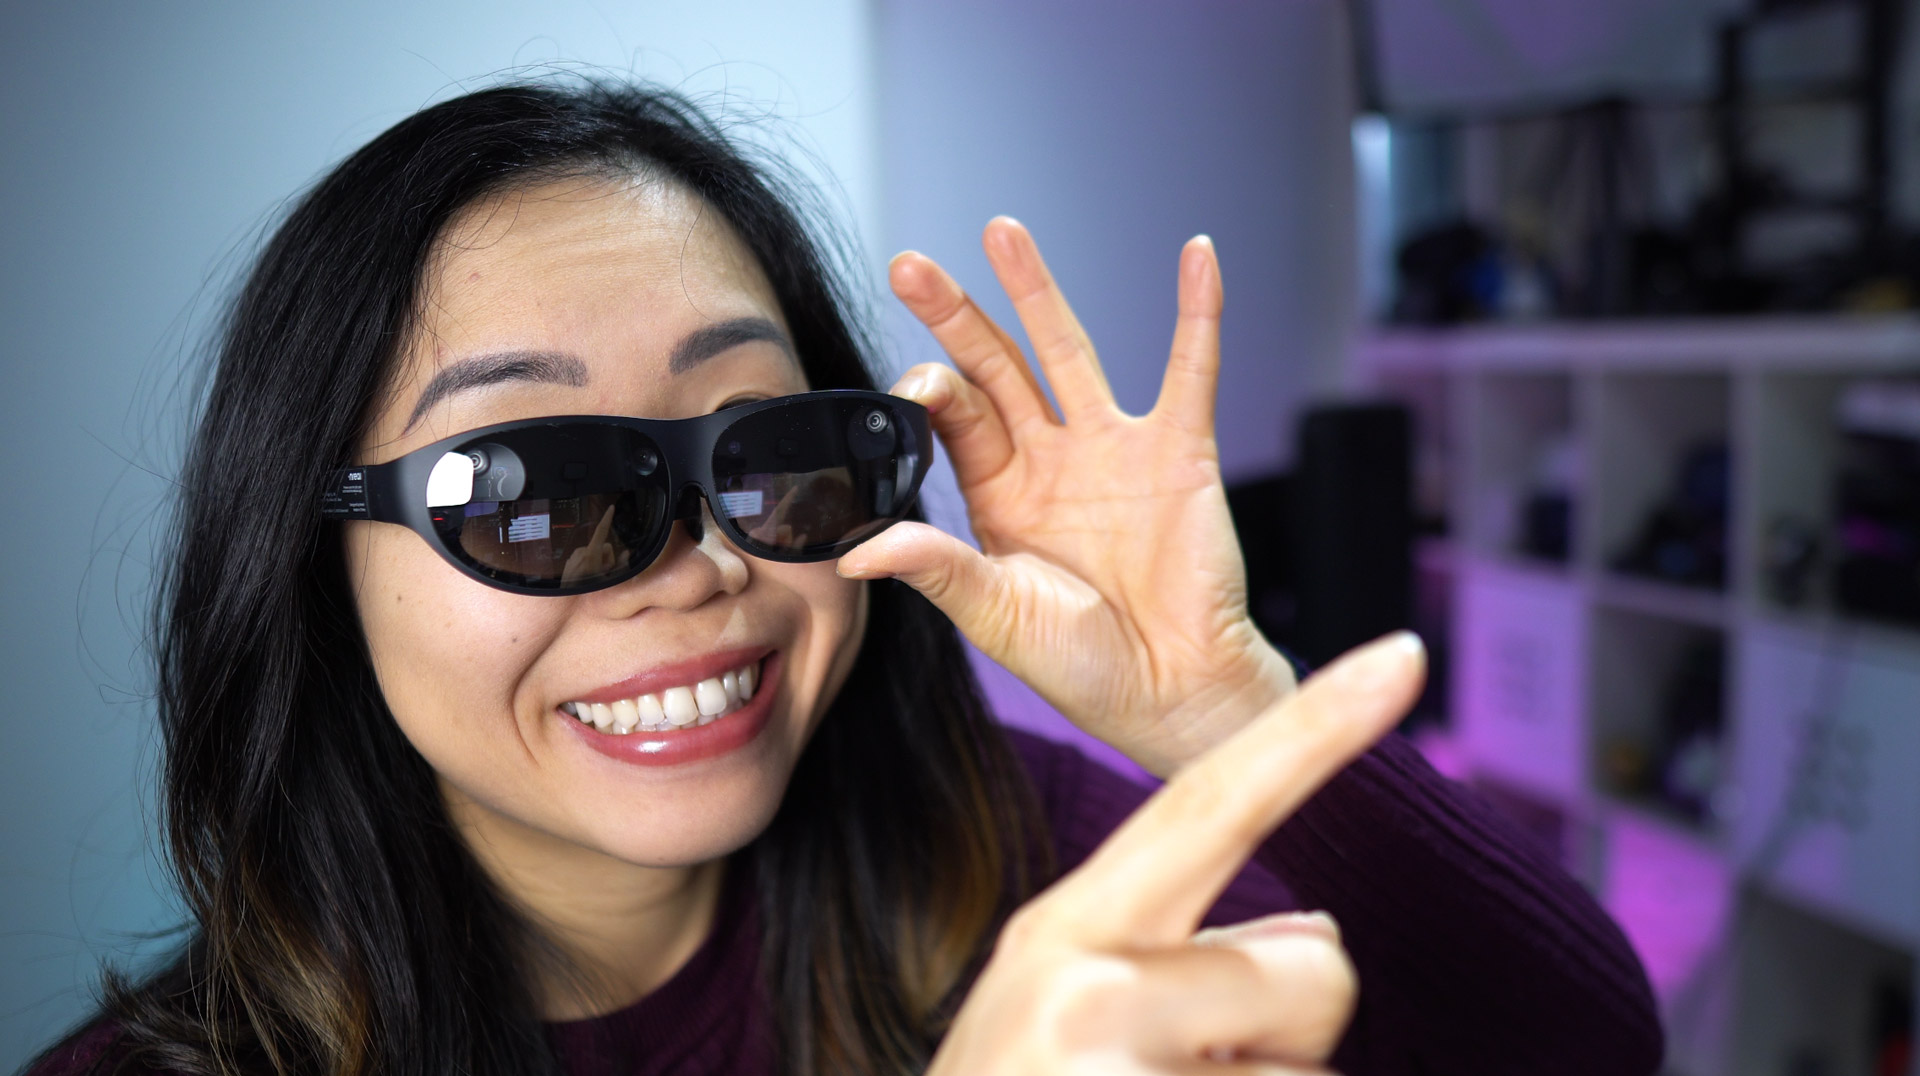 Hands-on with Nreal Light, One of the First Consumer-available AR Glasses